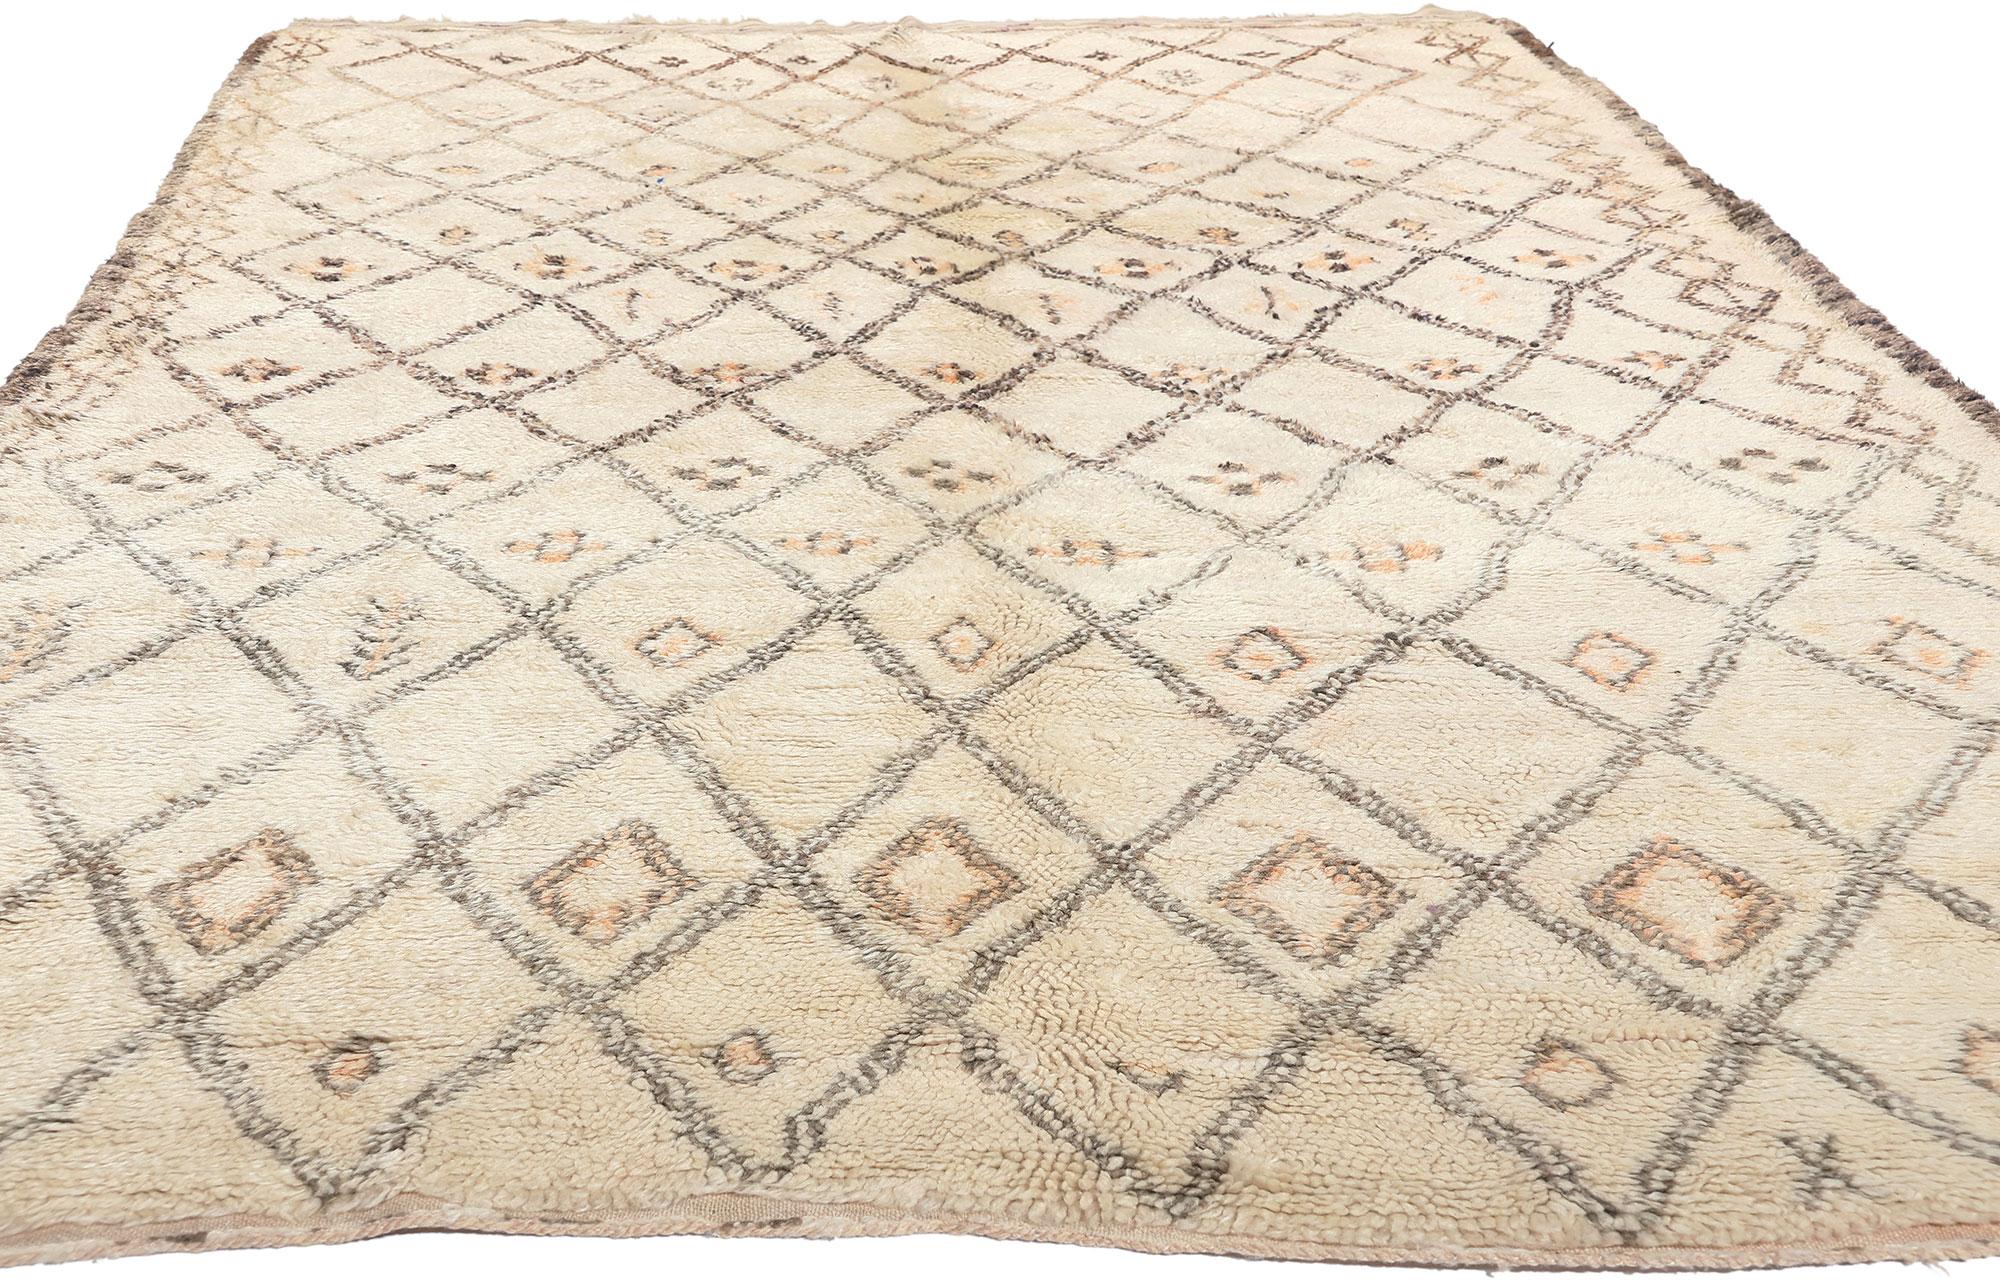 Mid-Century Modern Vintage Moroccan Beni Ourain Rug, Midcentury Modern Style Meets Shibui For Sale